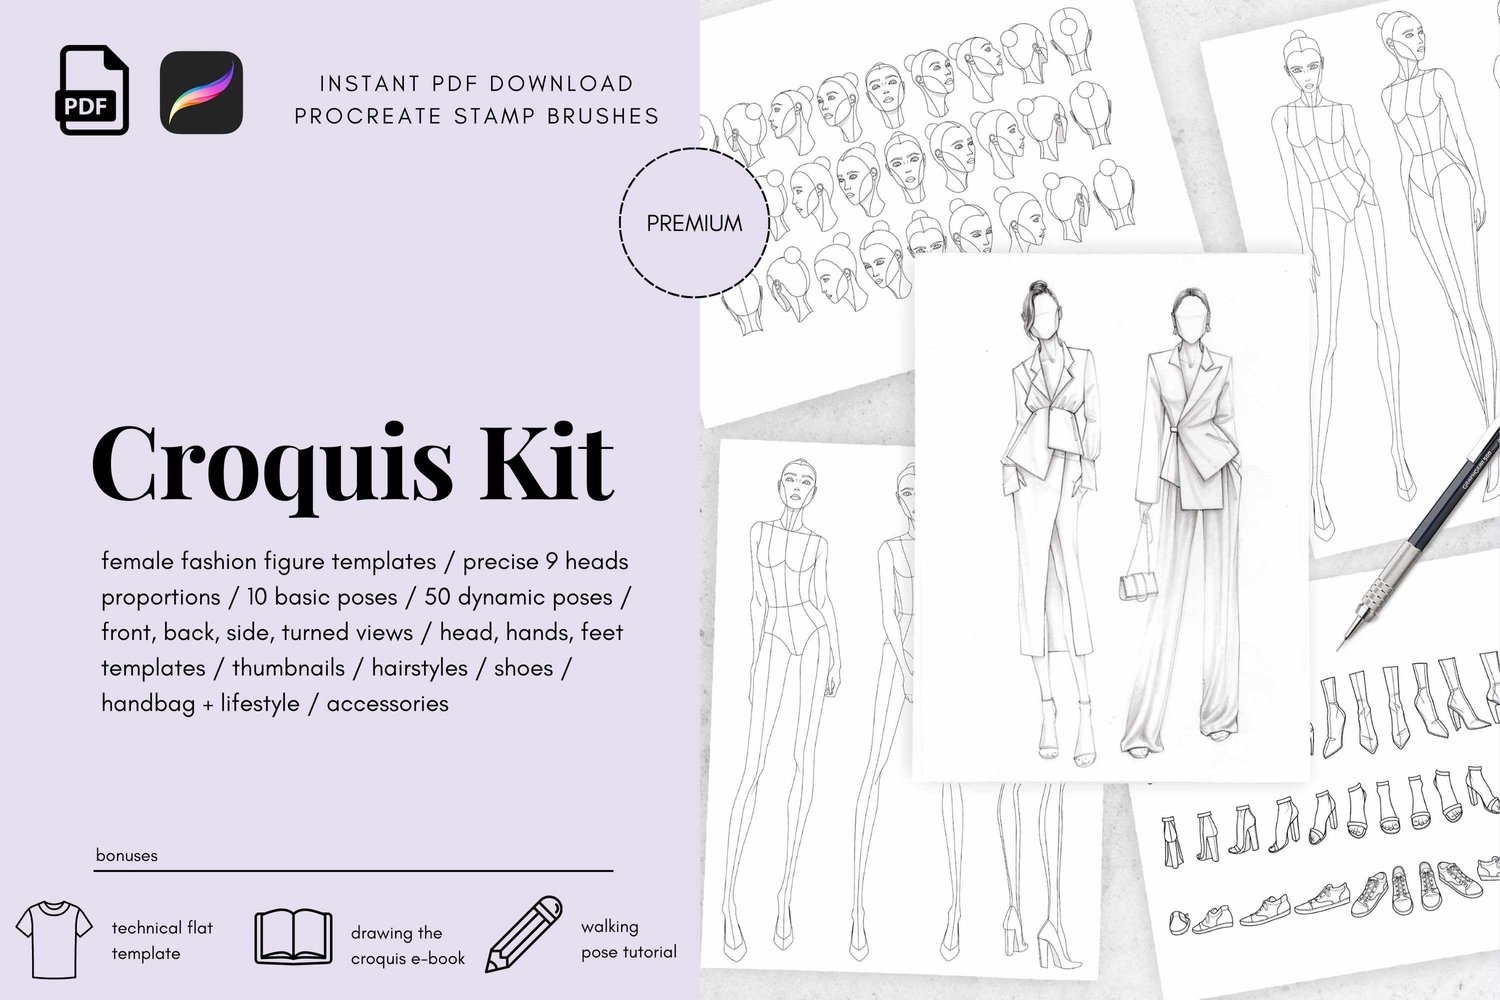 CROQUIS KIT: a collection of fashion figure templates for design